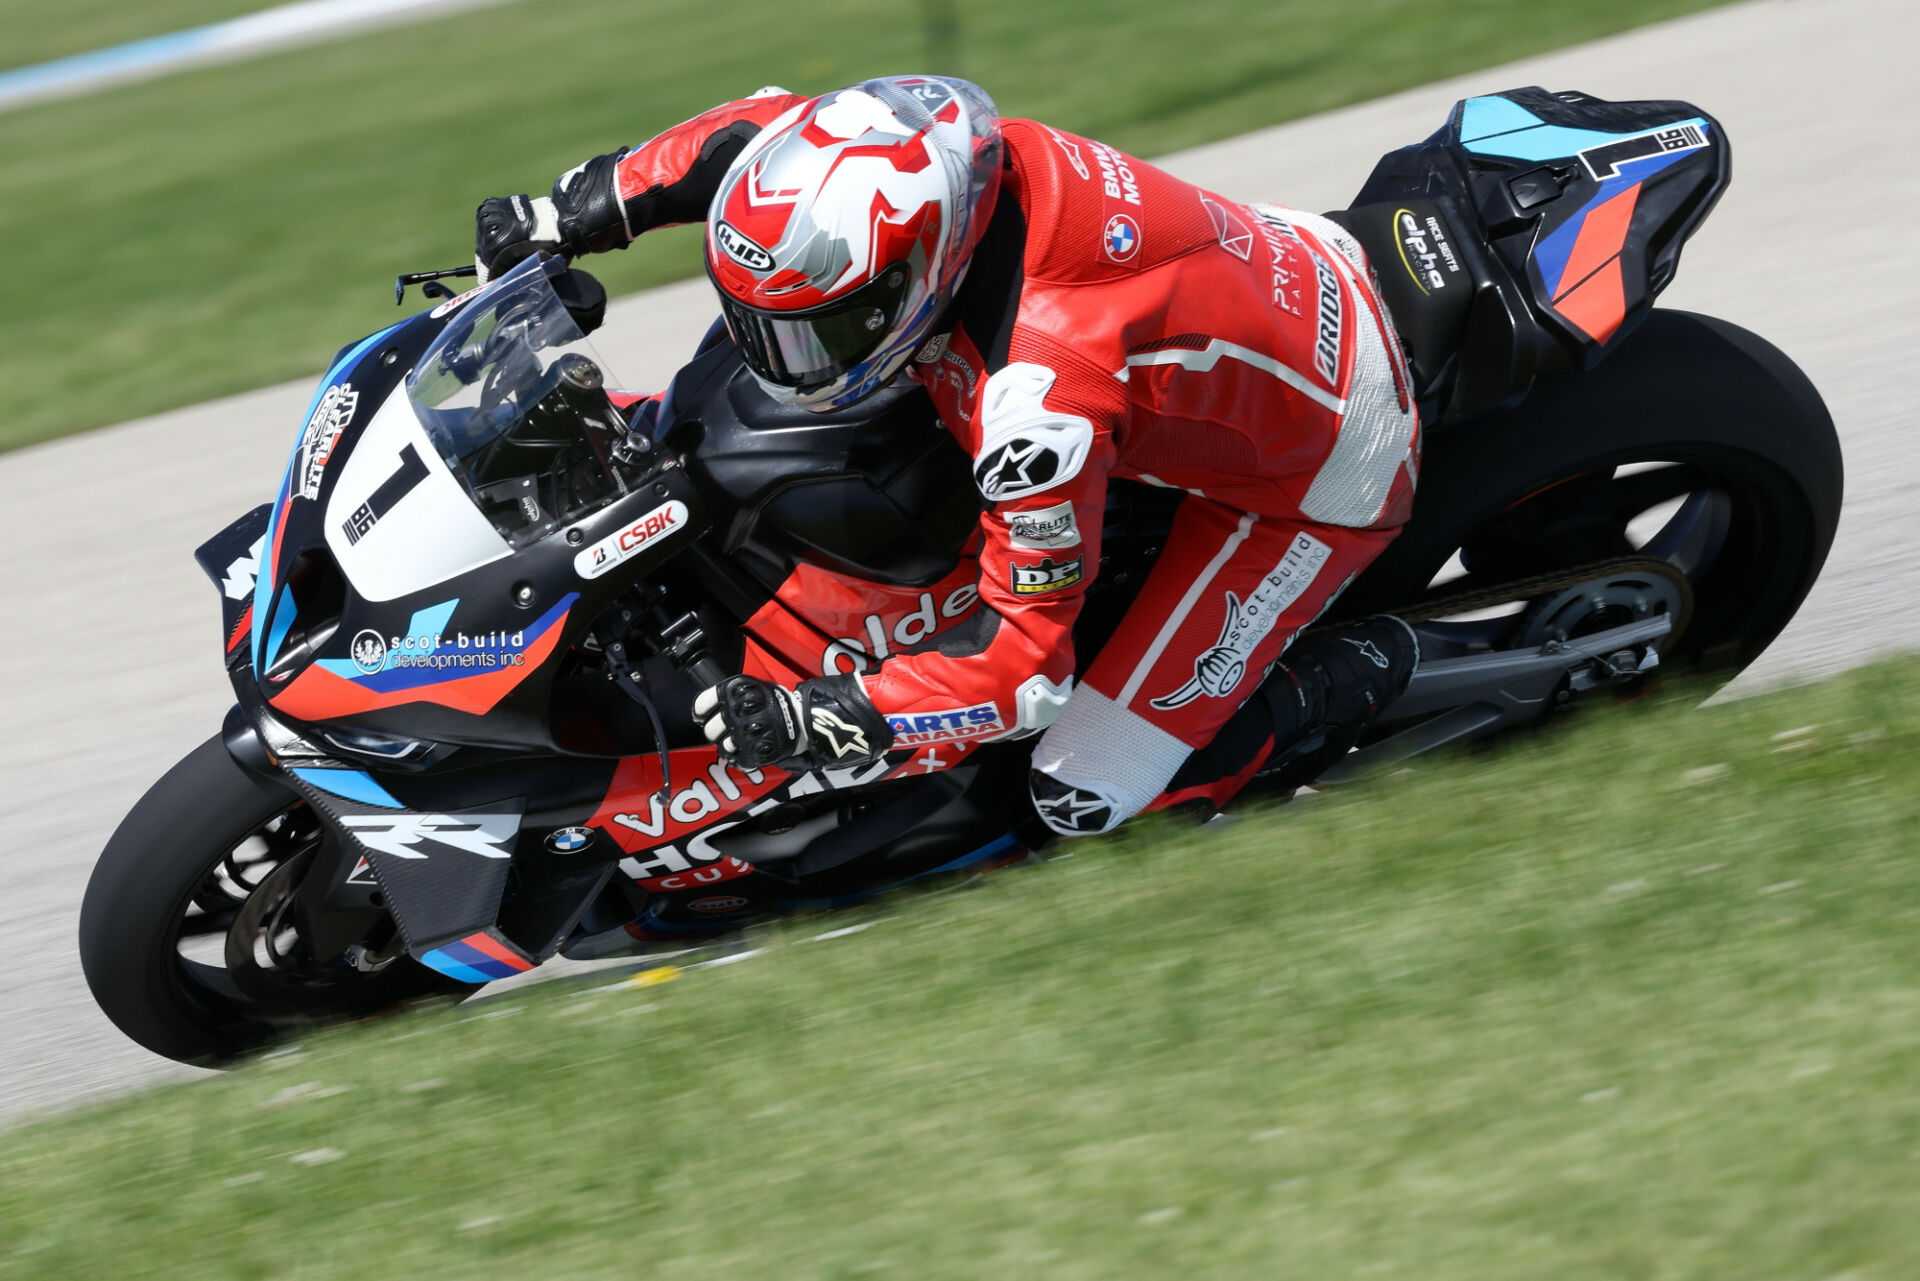 Ben Young (1) continues to lead the CSBK championship standings as the series shifts west to Edmonton this weekend after the BMW rider finished behind new Superbike race winners in both races at round two. Photo by Rob O'Brien, courtesy CSBK.